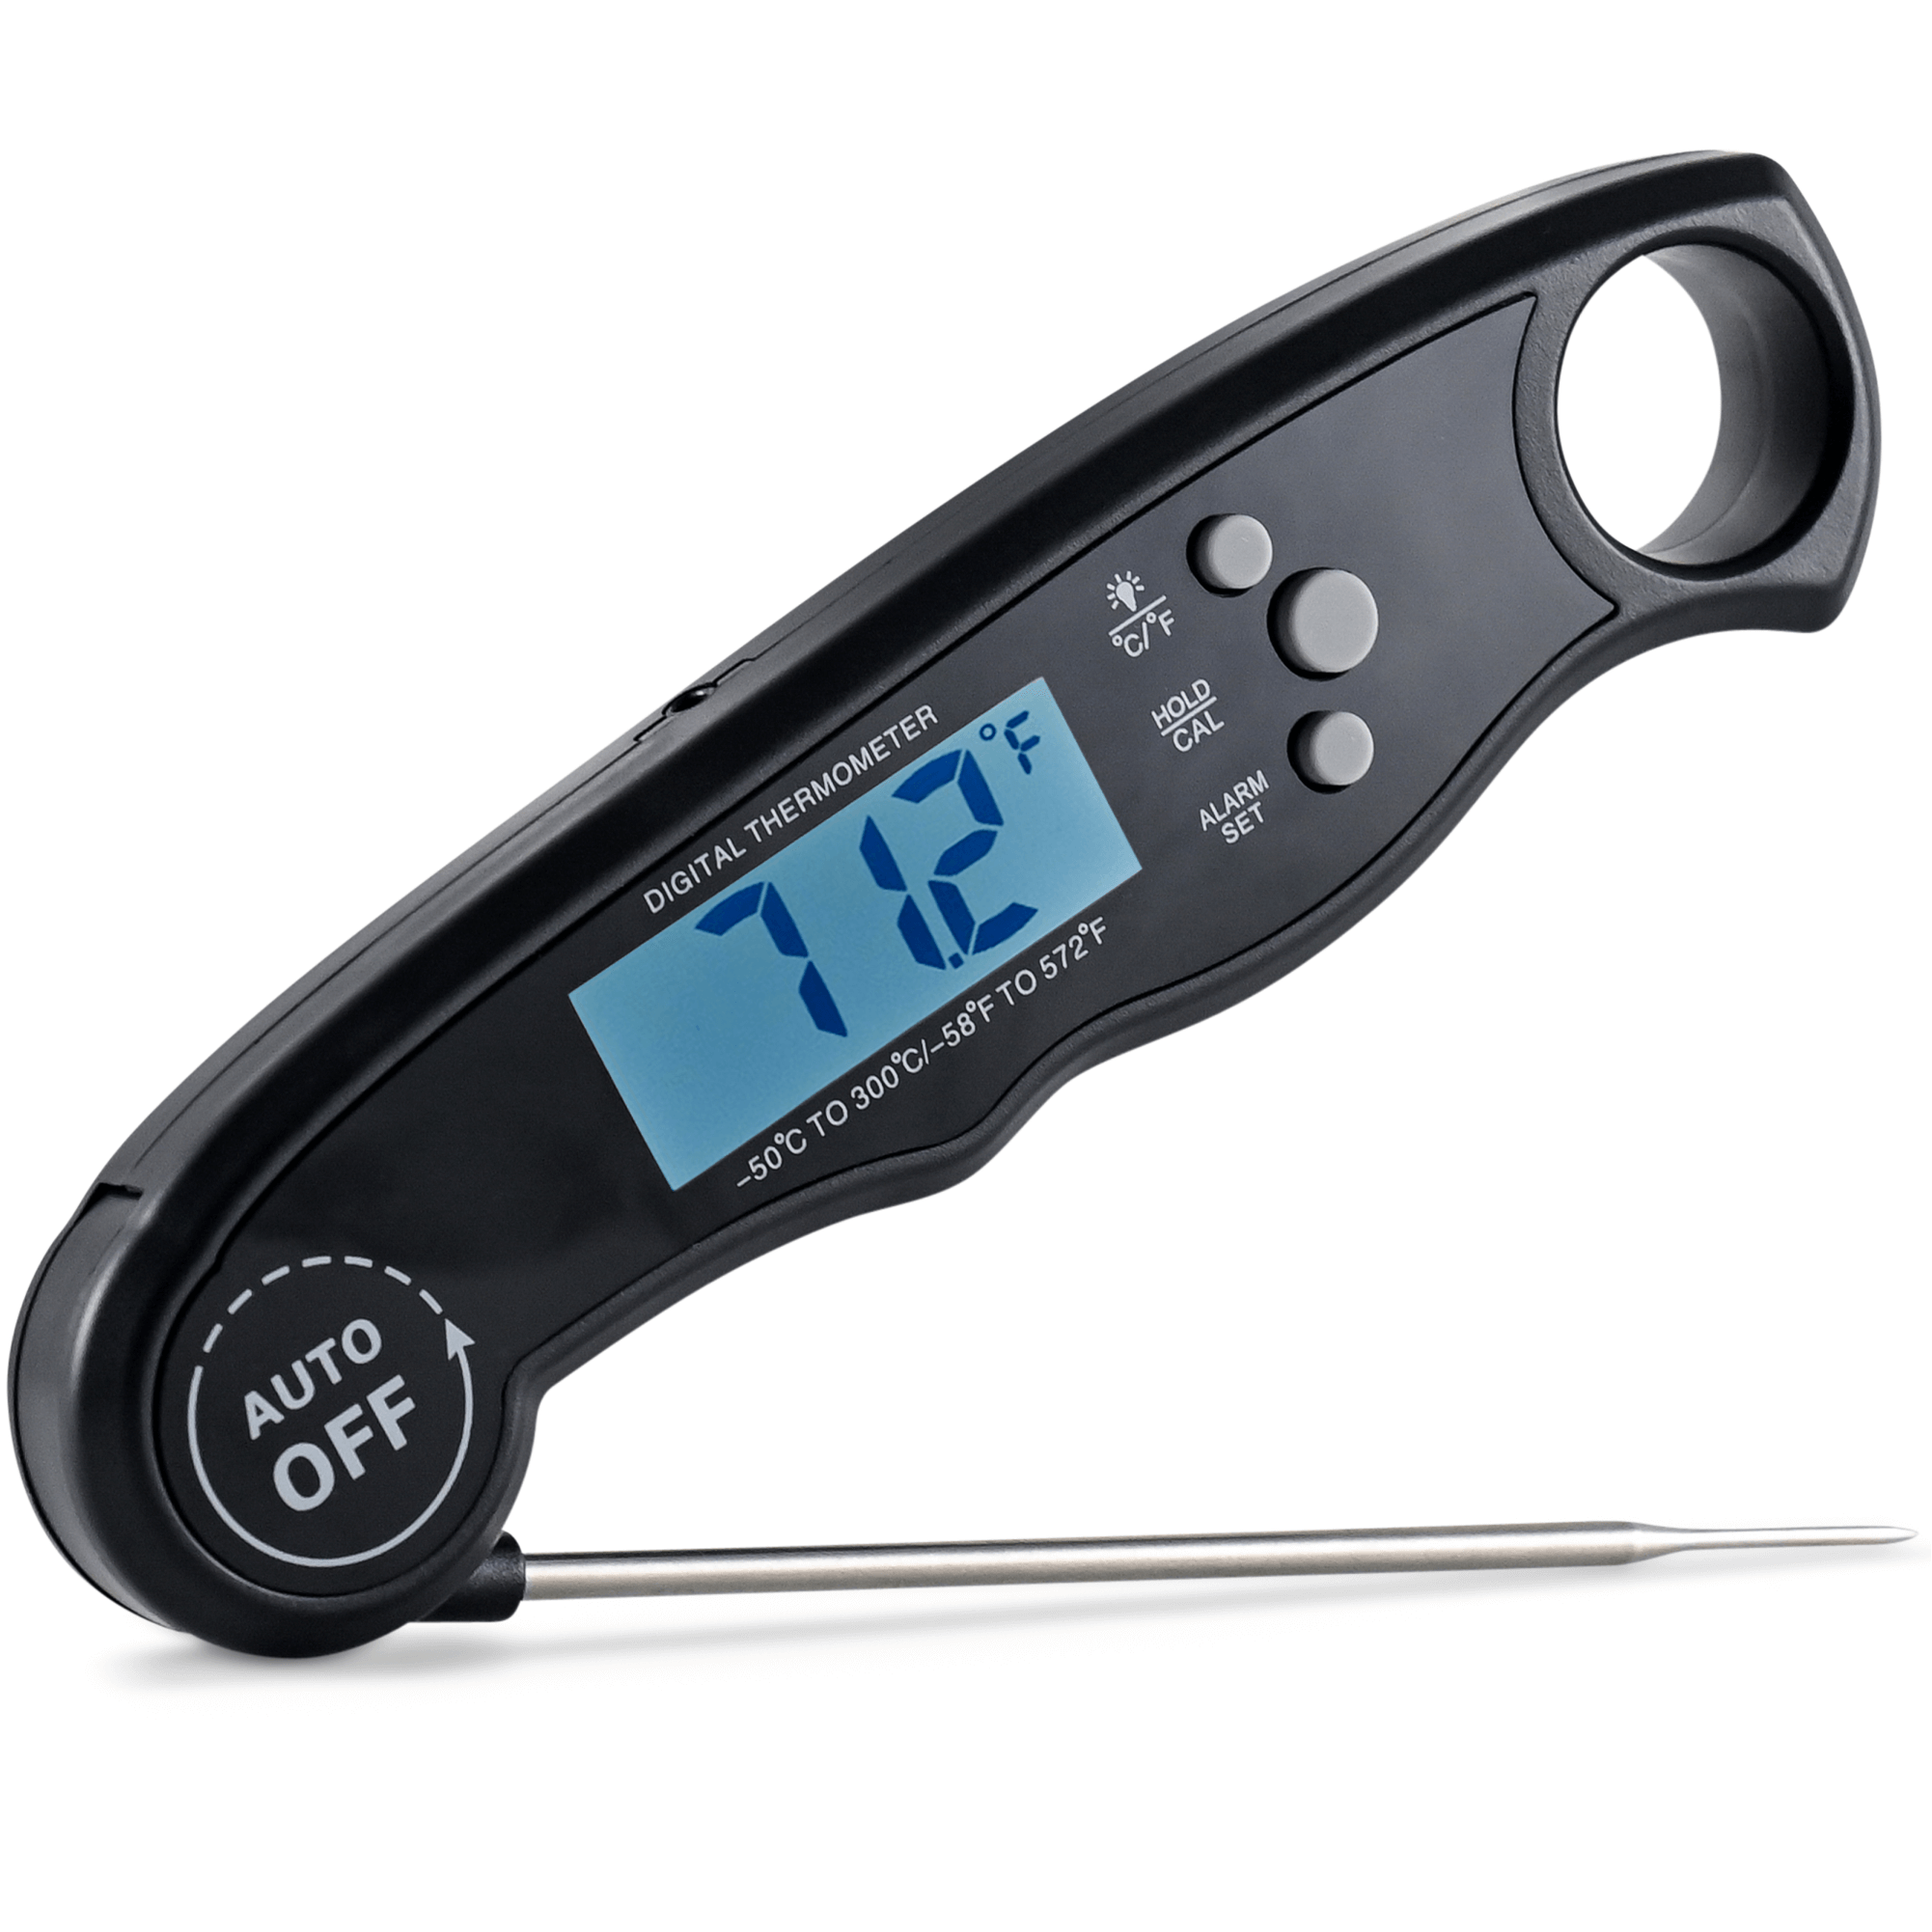 https://cdn.shopify.com/s/files/1/2091/6511/products/cheer-collection-digital-meat-thermometer-instant-read-food-thermometer-with-backlight-lcd-screen-foldable-cooking-thermometer-for-bbq-and-kitchen-661892.png?v=1672303720